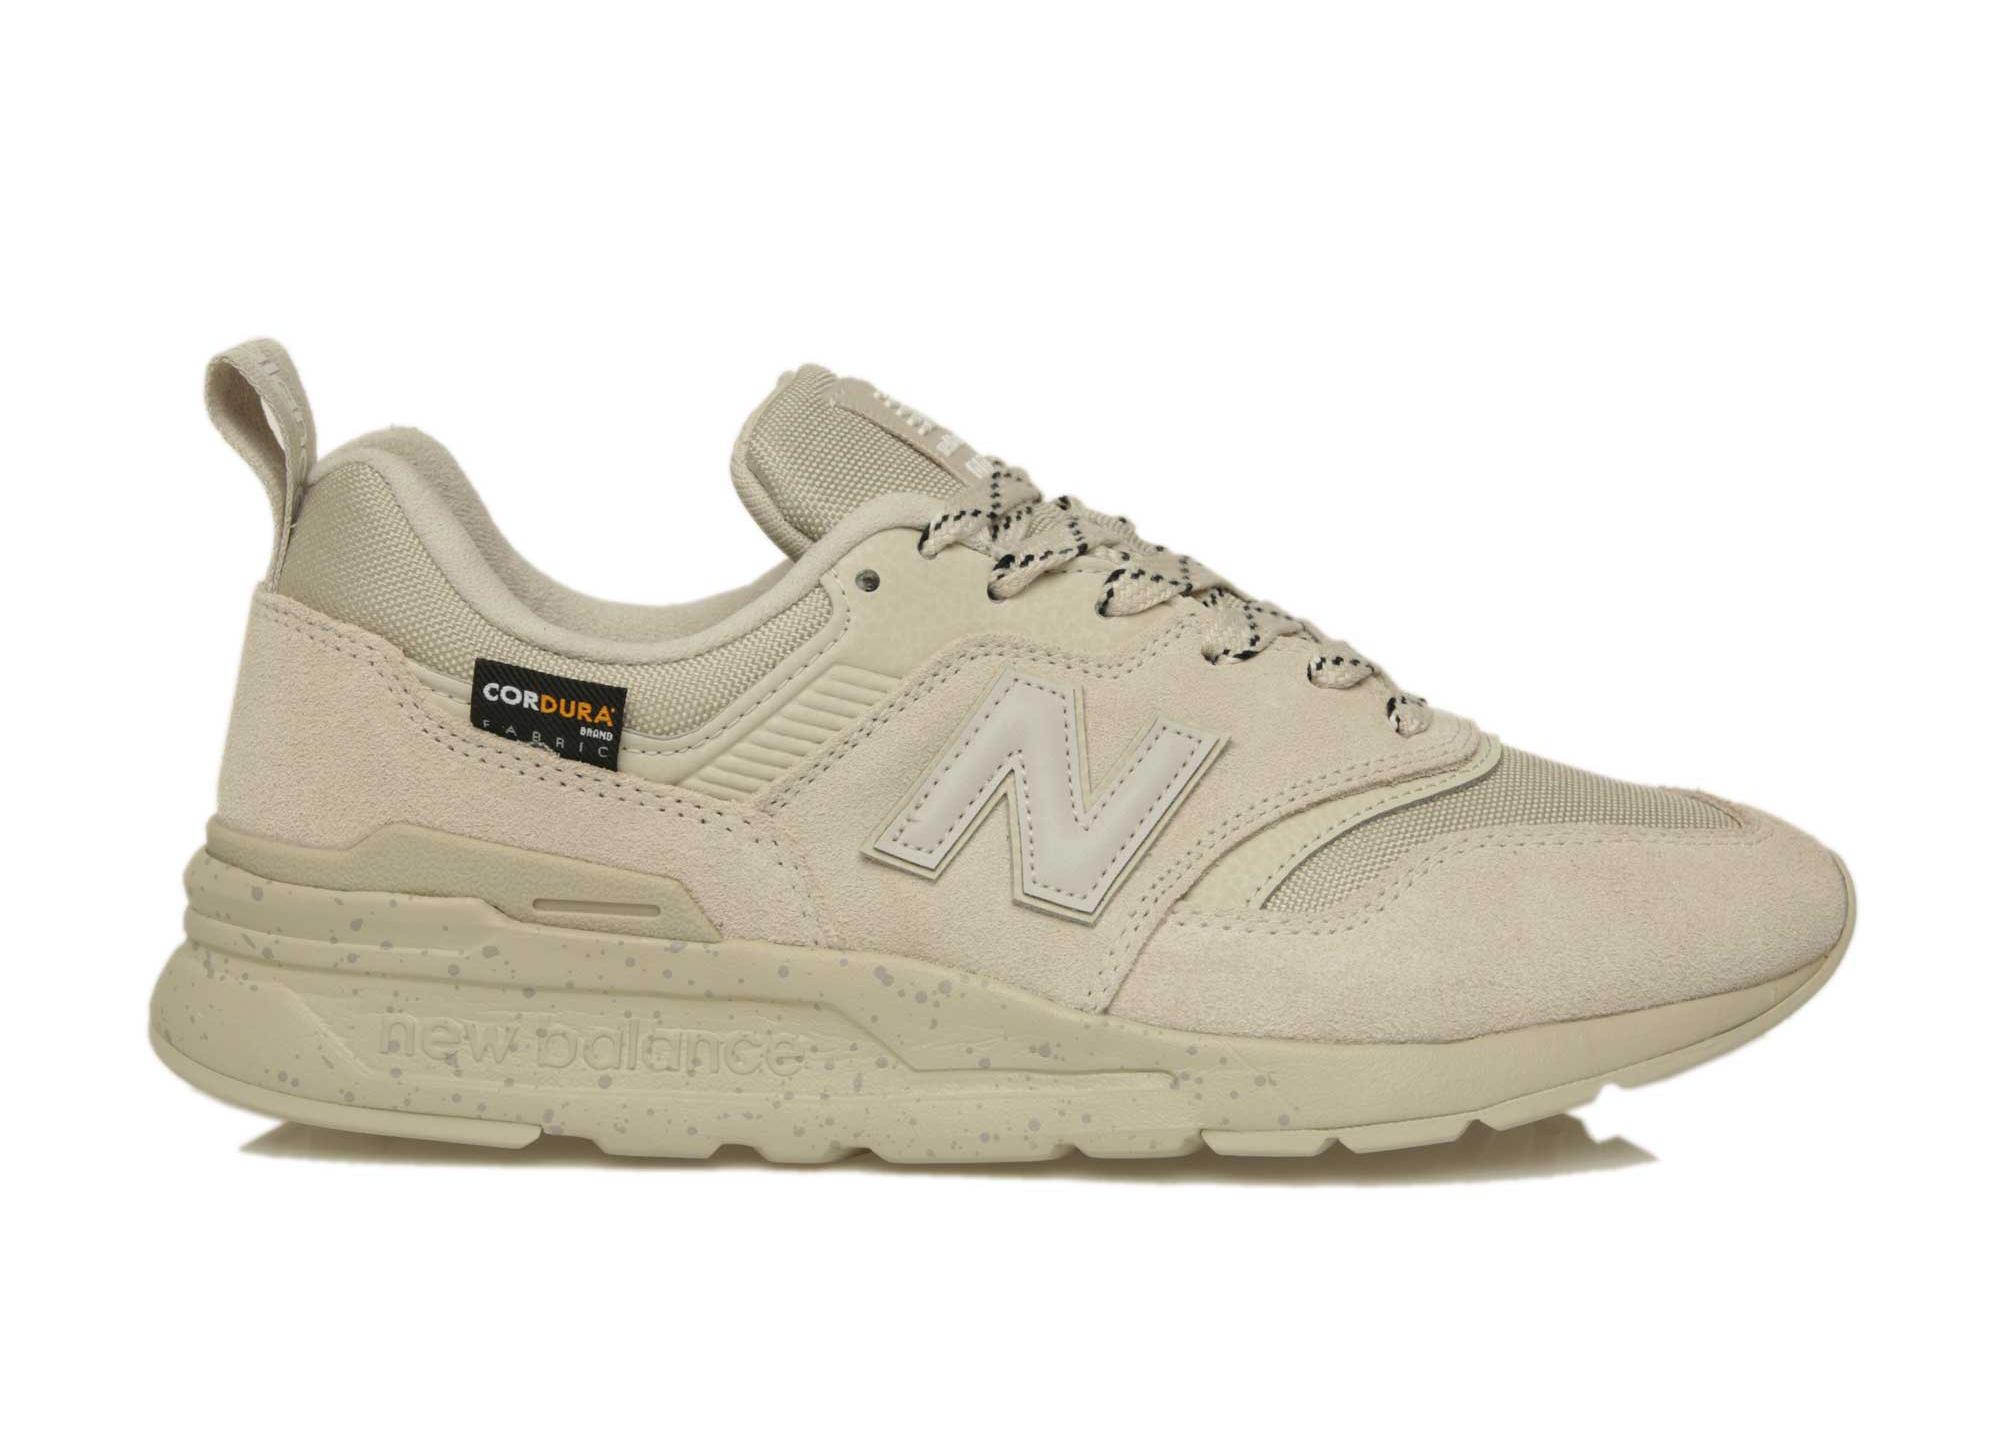 New Balance 997h Cordura Oyster for Men 